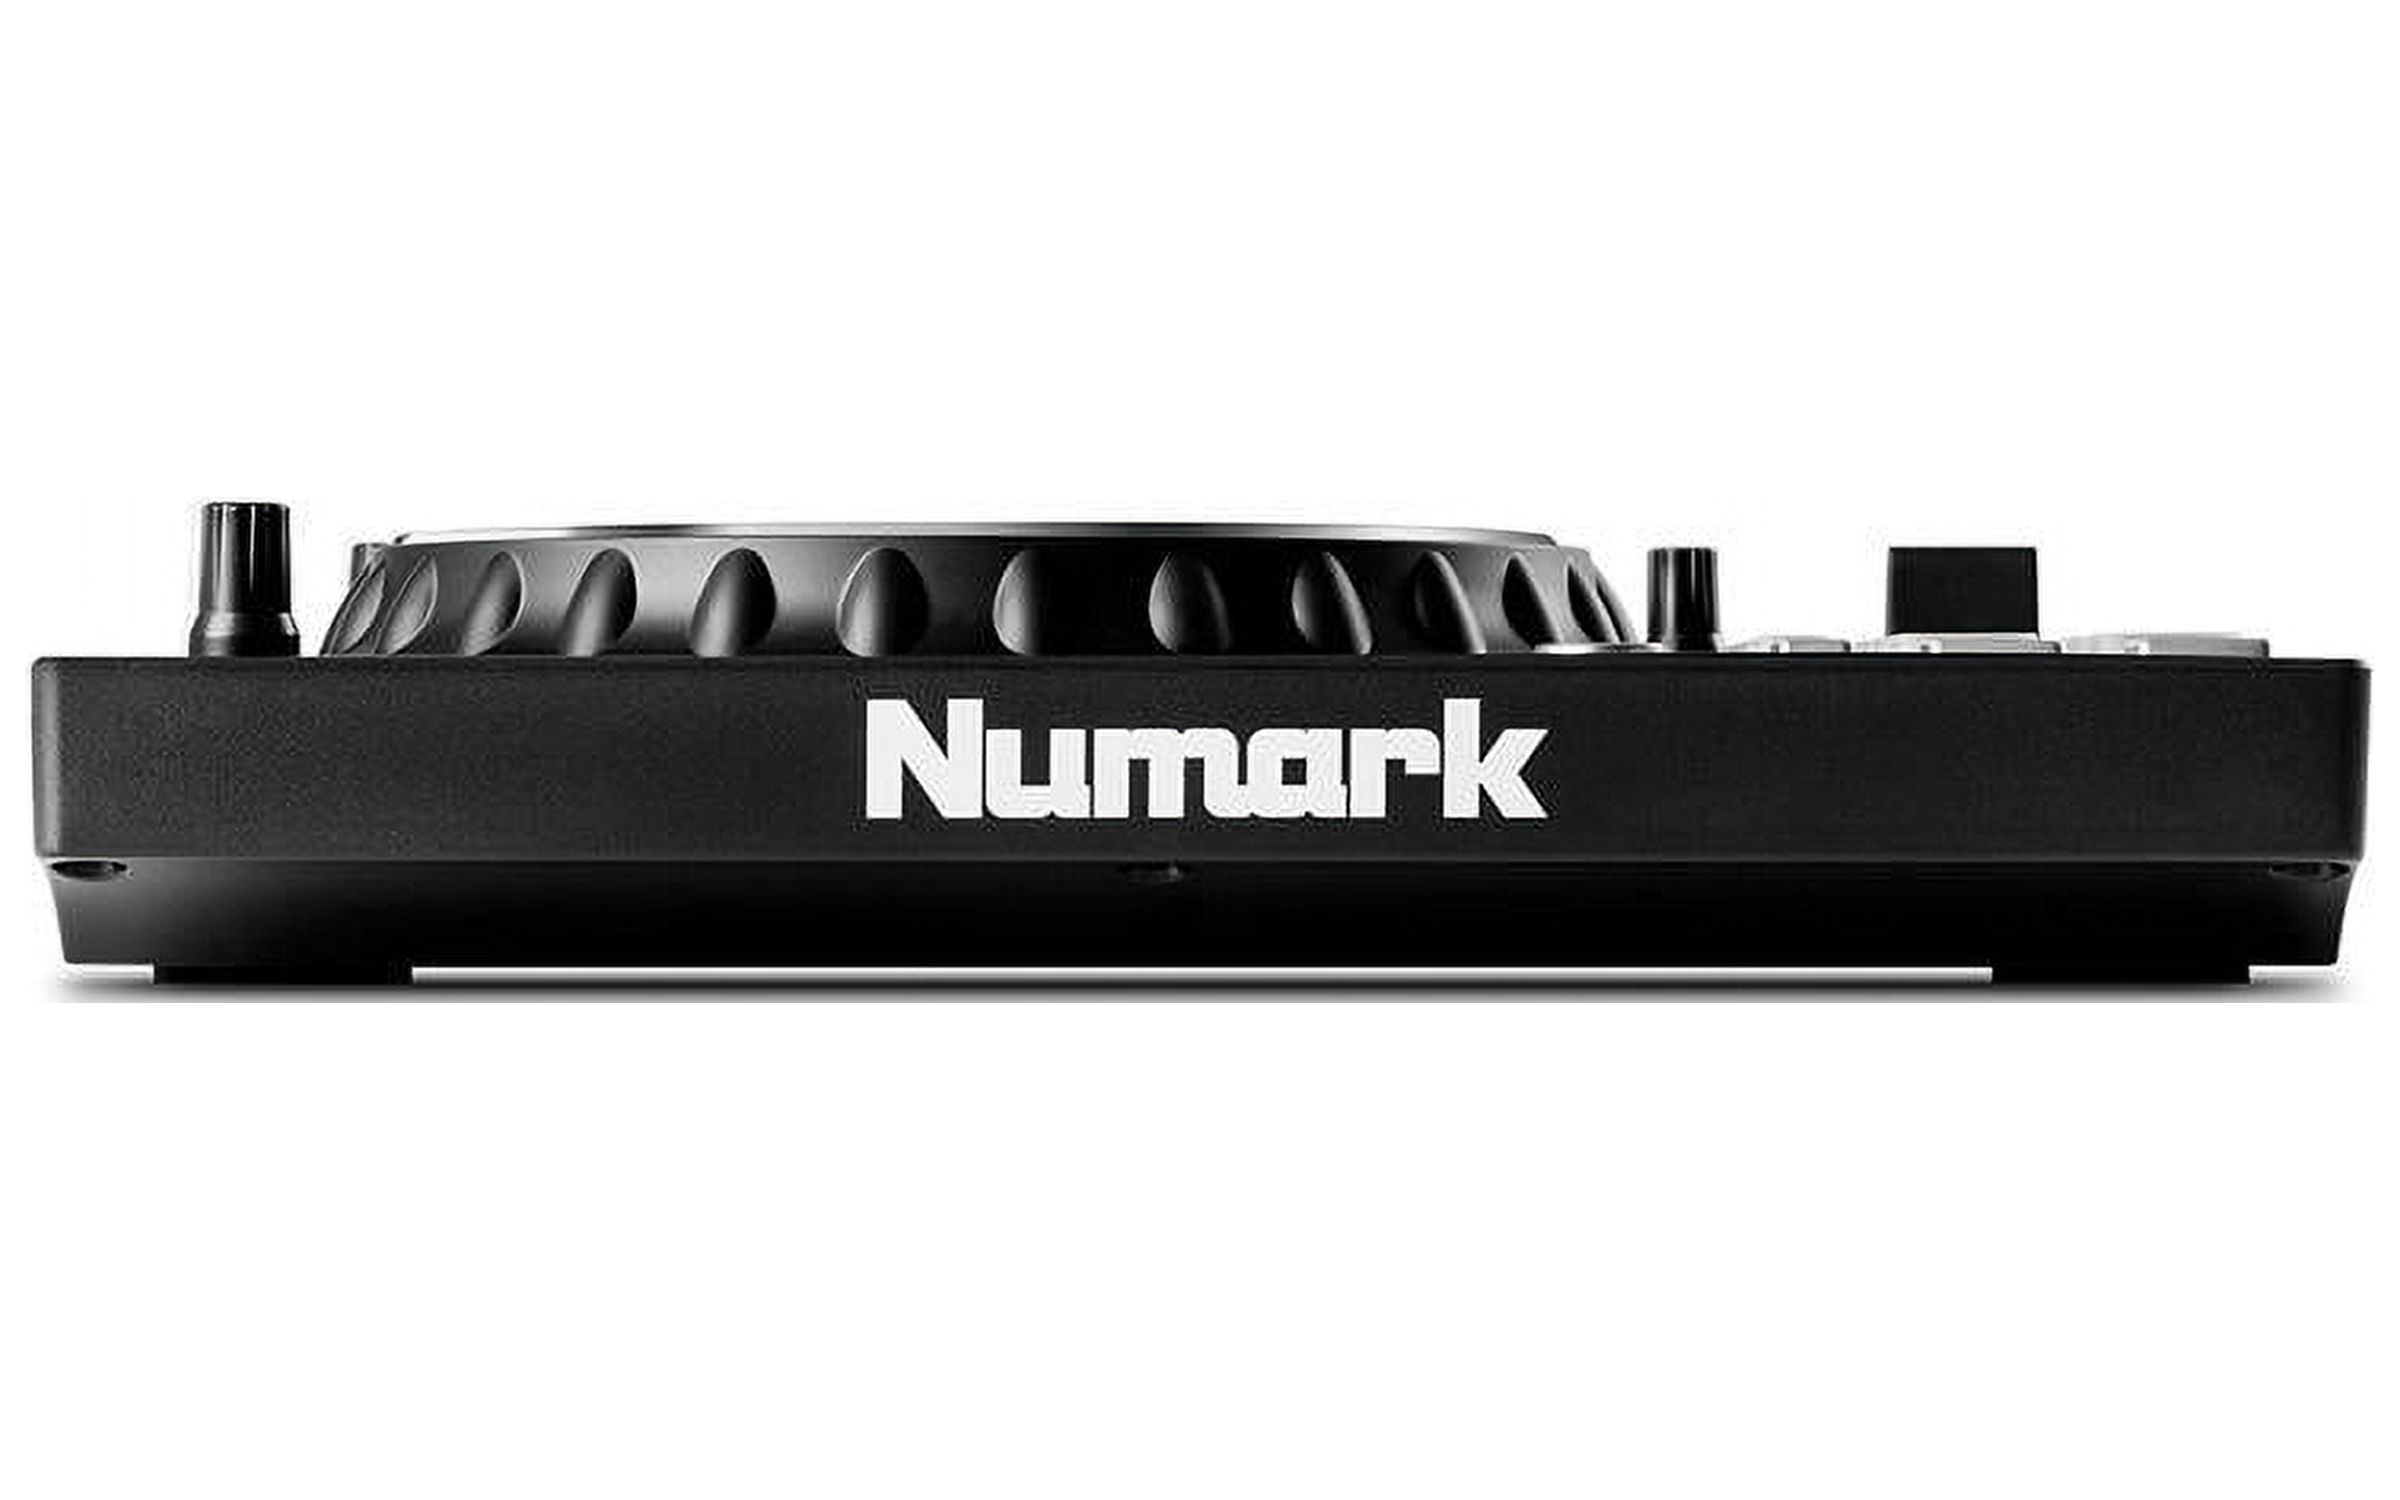 Numark Mixtrack Platinum FX - DJ Controller for Serato with 4 Deck Control, Mixer, Built-in Audio Interface, Jog Wheel Displays and Paddles - image 4 of 7